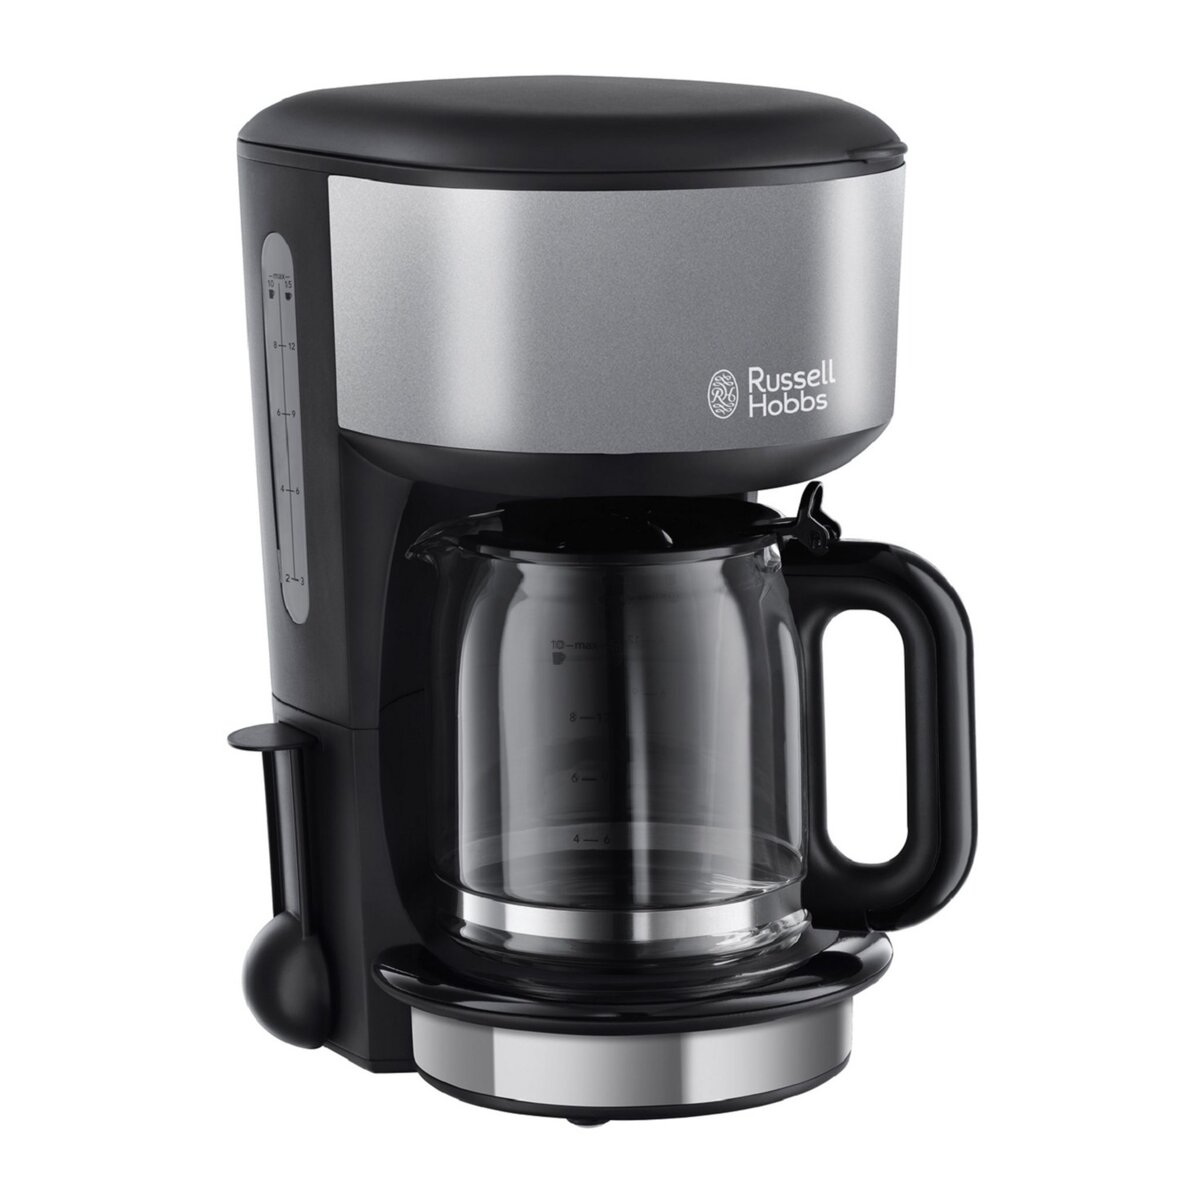 RUSSELL HOBBS Cafetiere 20132-56 Colours gris orage